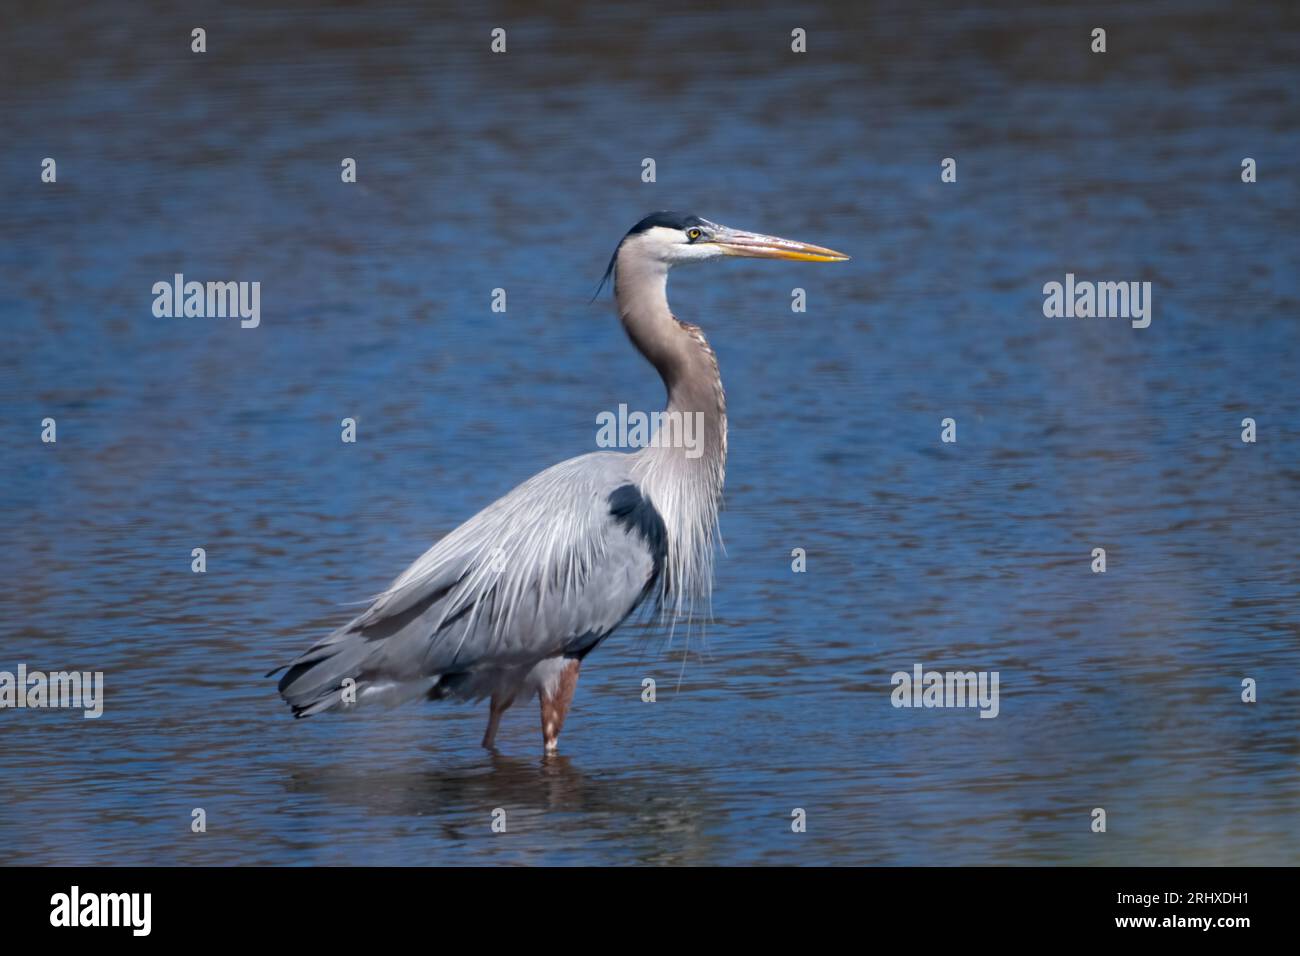 Herons are long-legged, long-necked freshwater and coastal birds in the family Ardeidae, with 72 recognized species. I photographed these in Kansas Stock Photo